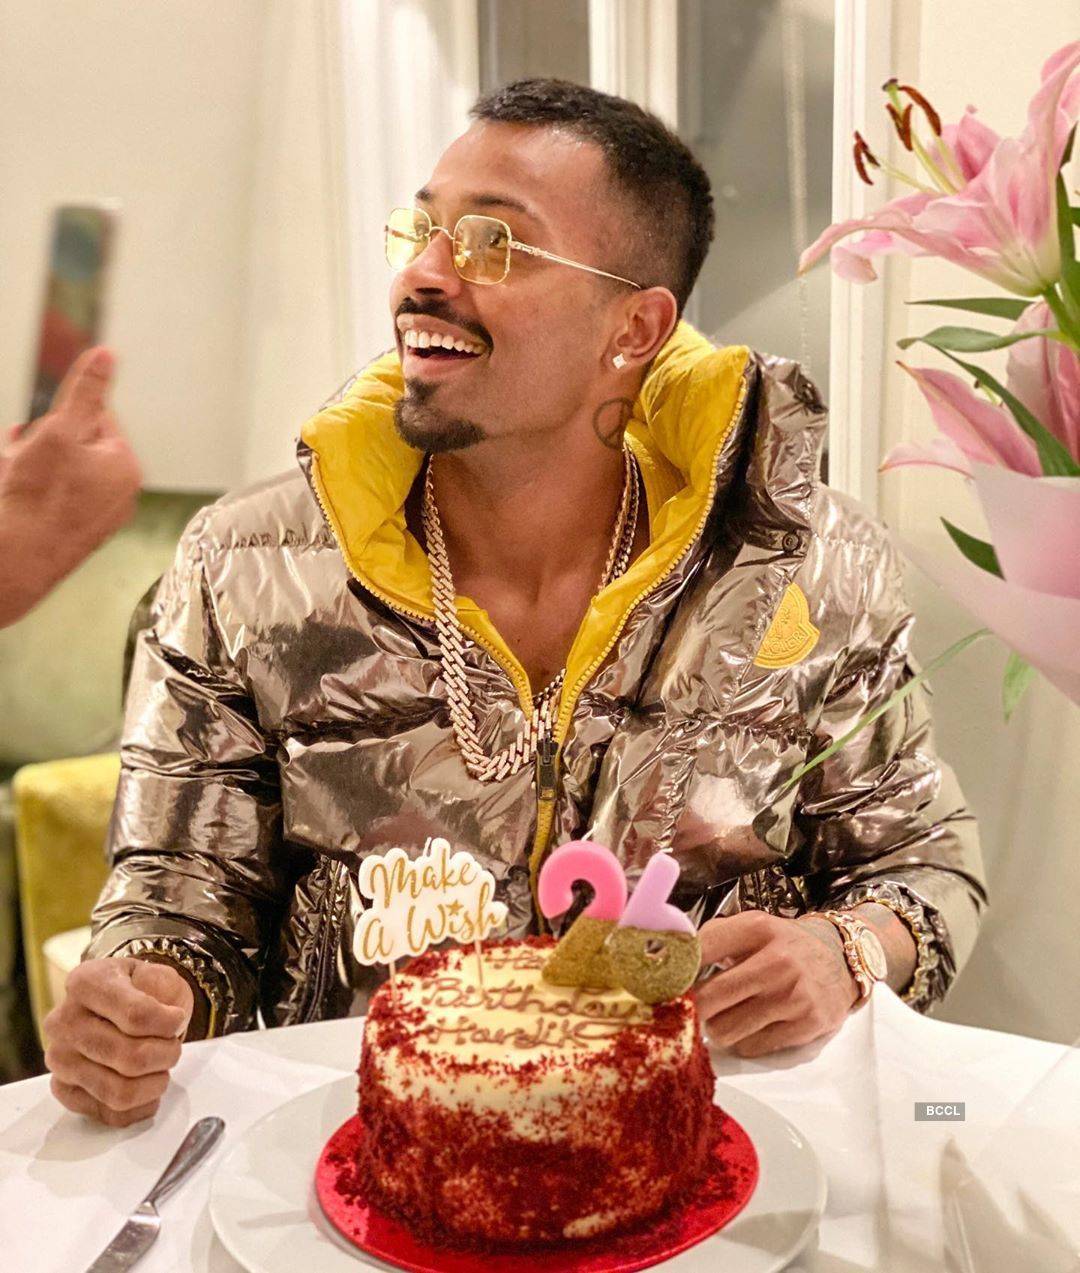 Hardik Pandya shares the most adorable childhood picture on social media